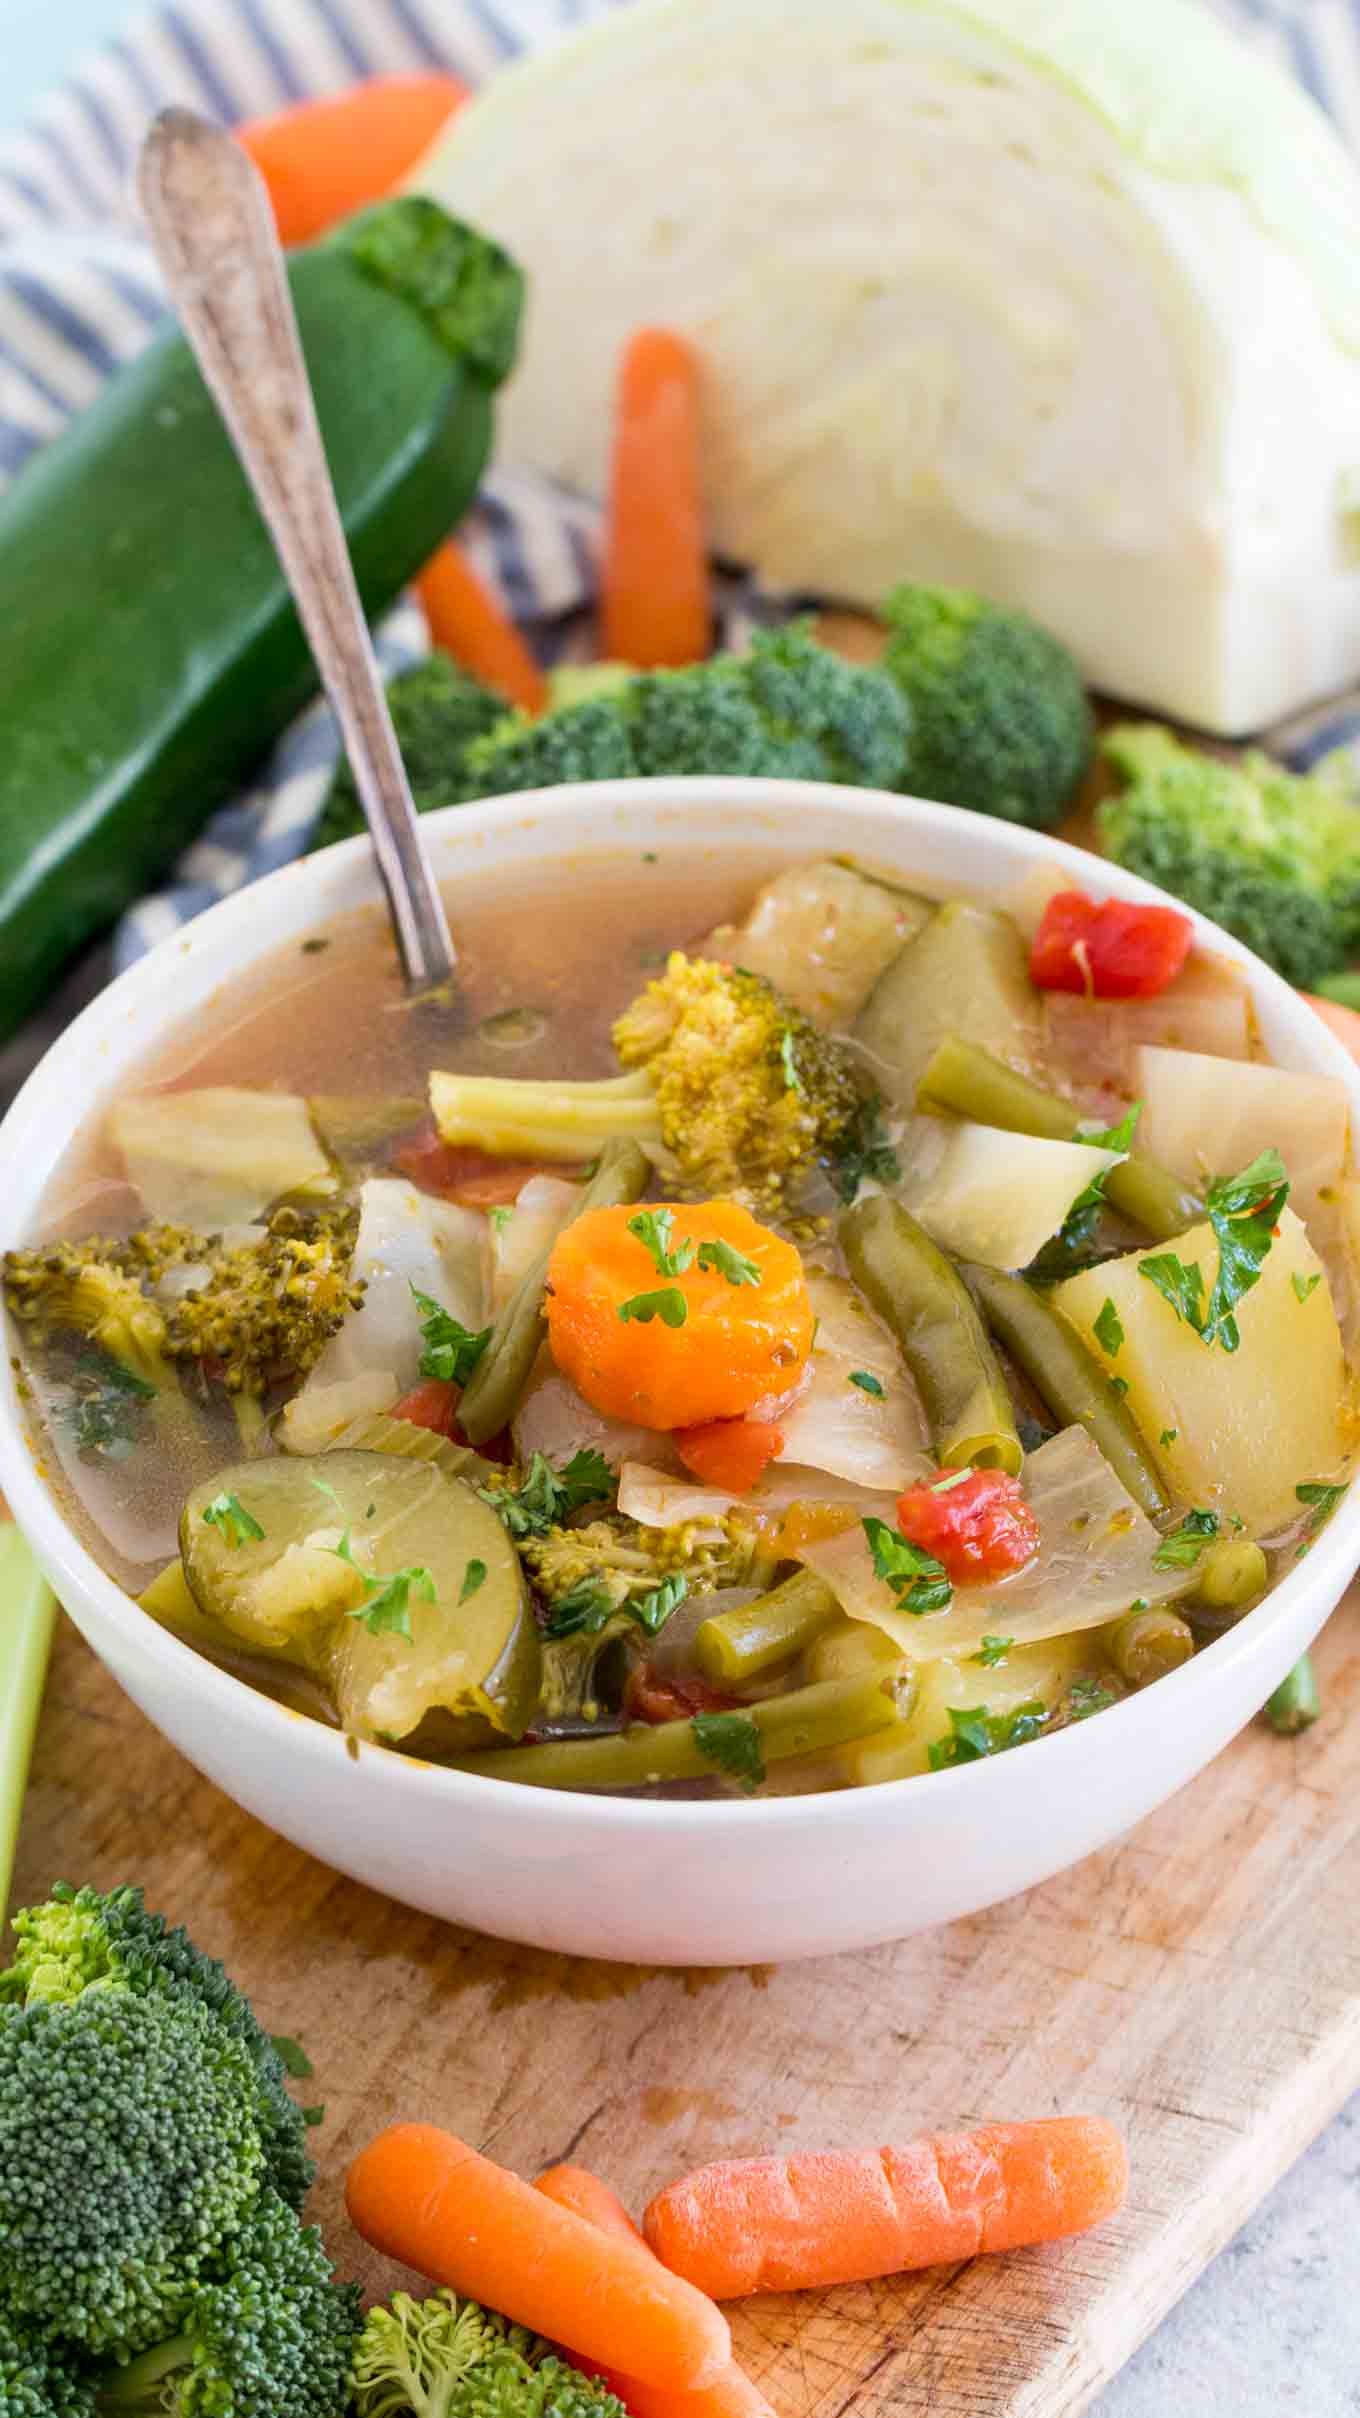 vegetable soup for weight loss